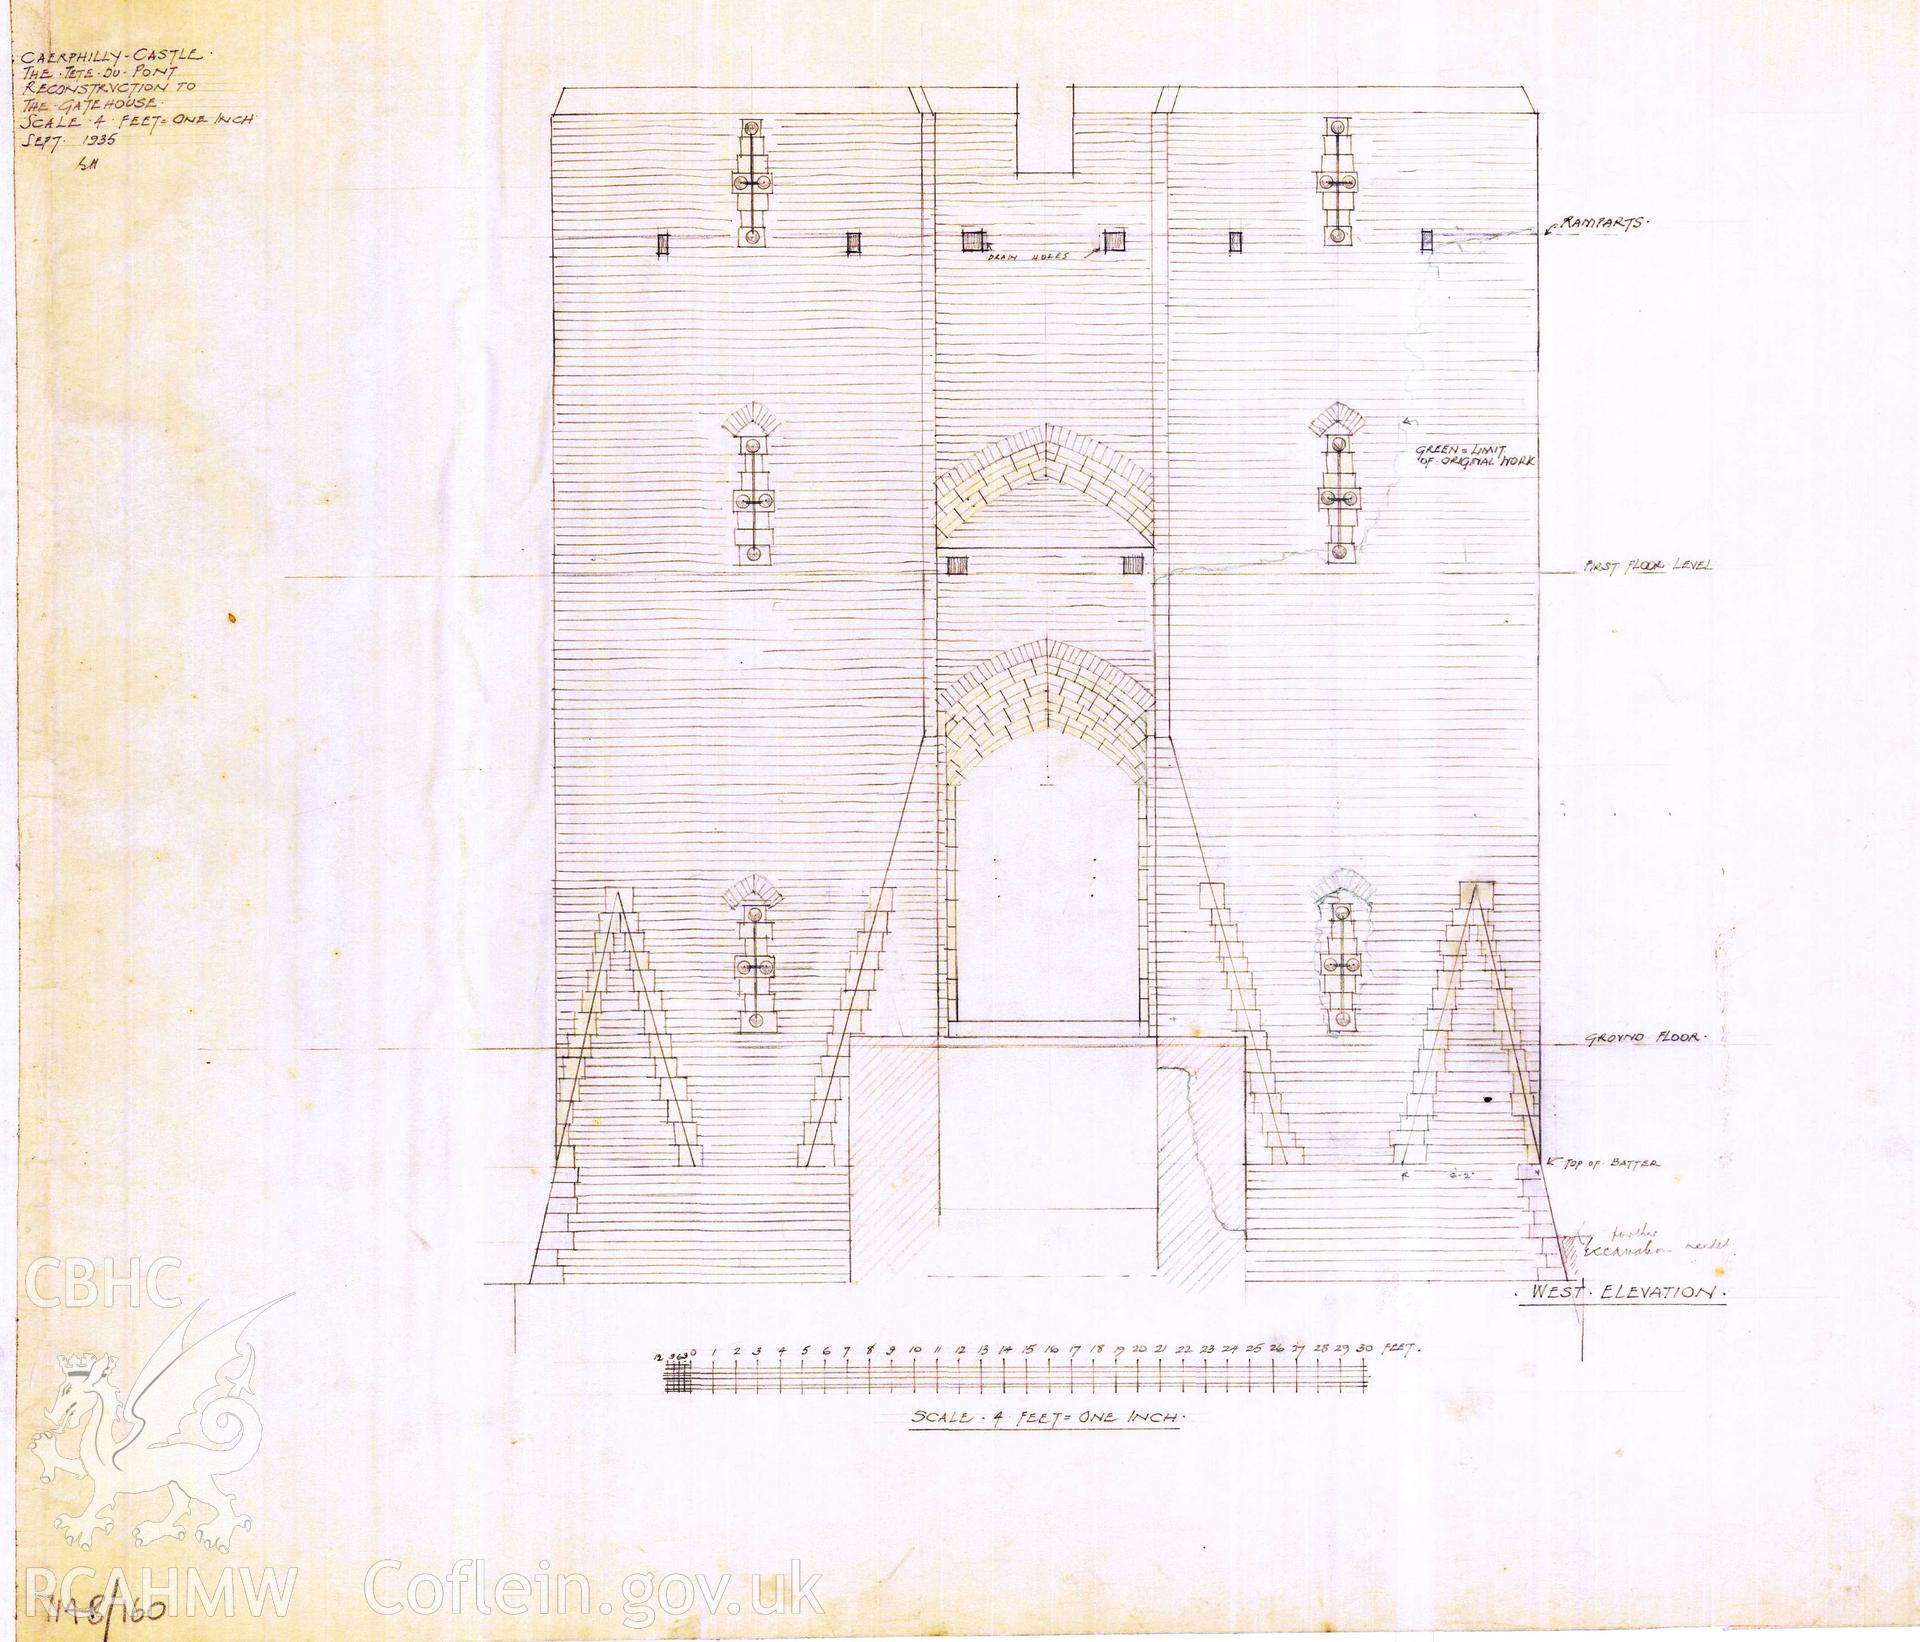 Cadw guardianship monument drawing of Caerphilly Castle. Dam, S gate, ext elev (W) (i). Cadw Ref. No:714B/160. Scale 1:48.